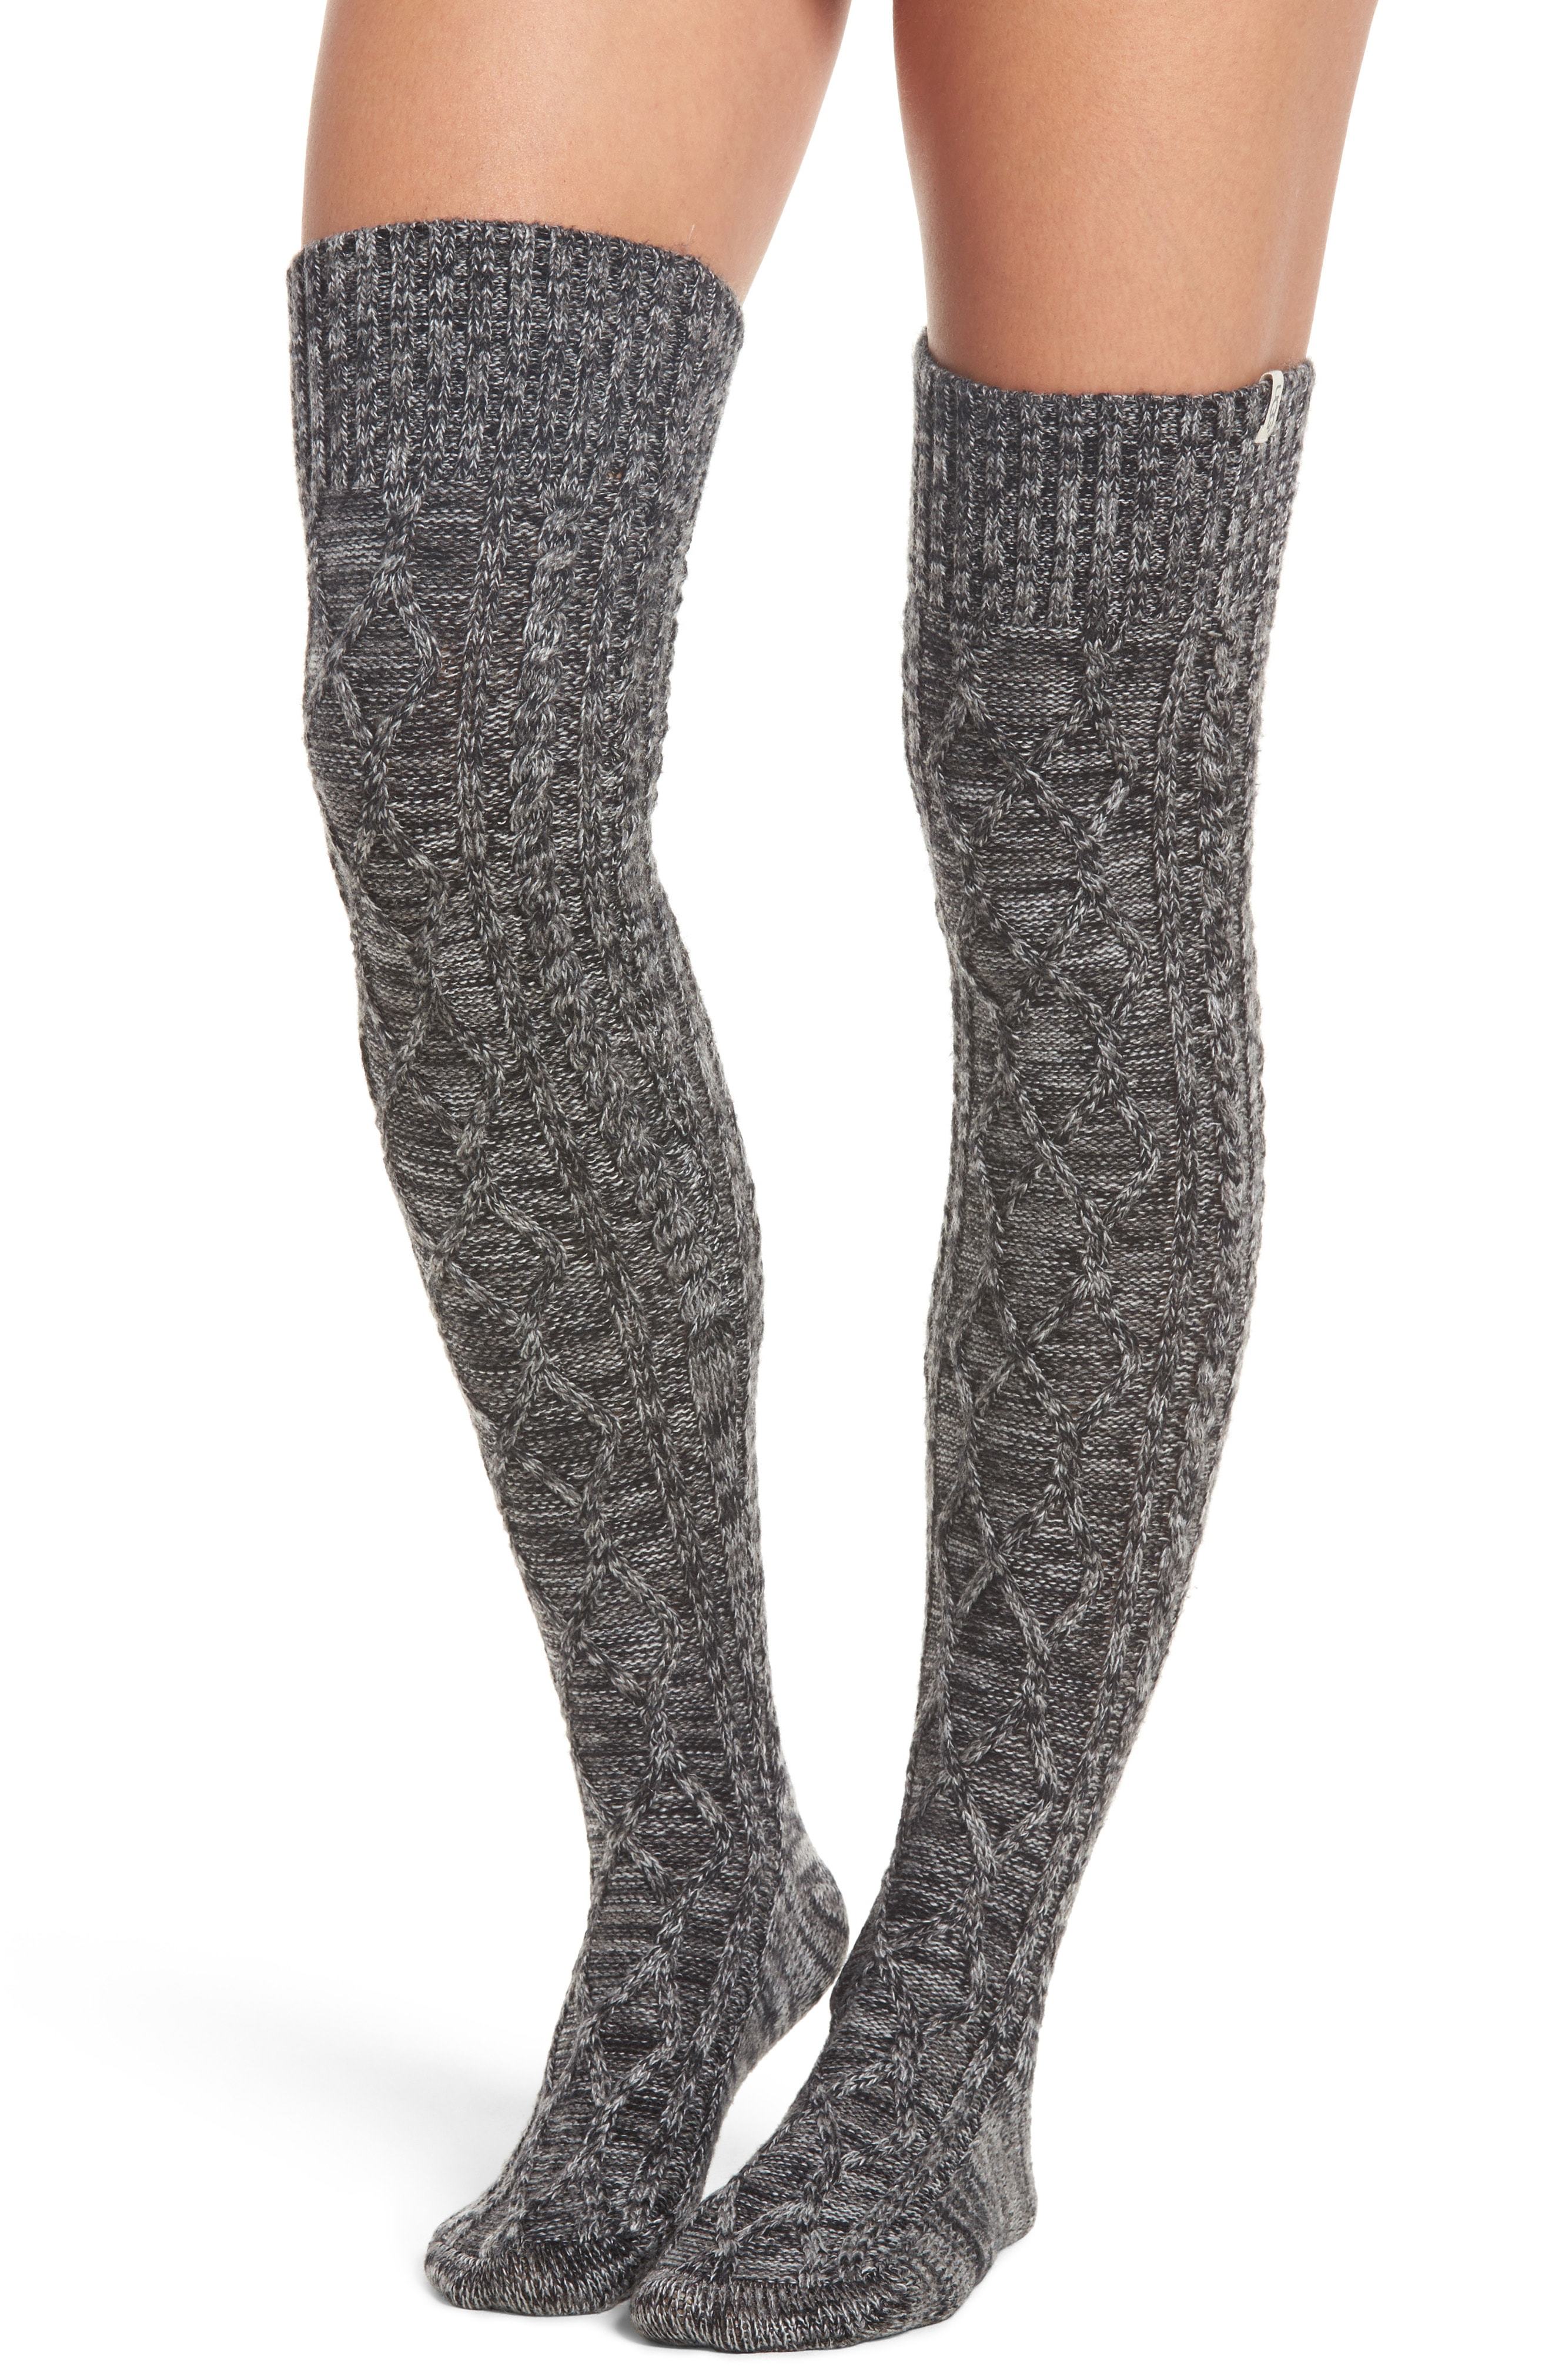 ugg sparkle cable knit over the knee socks